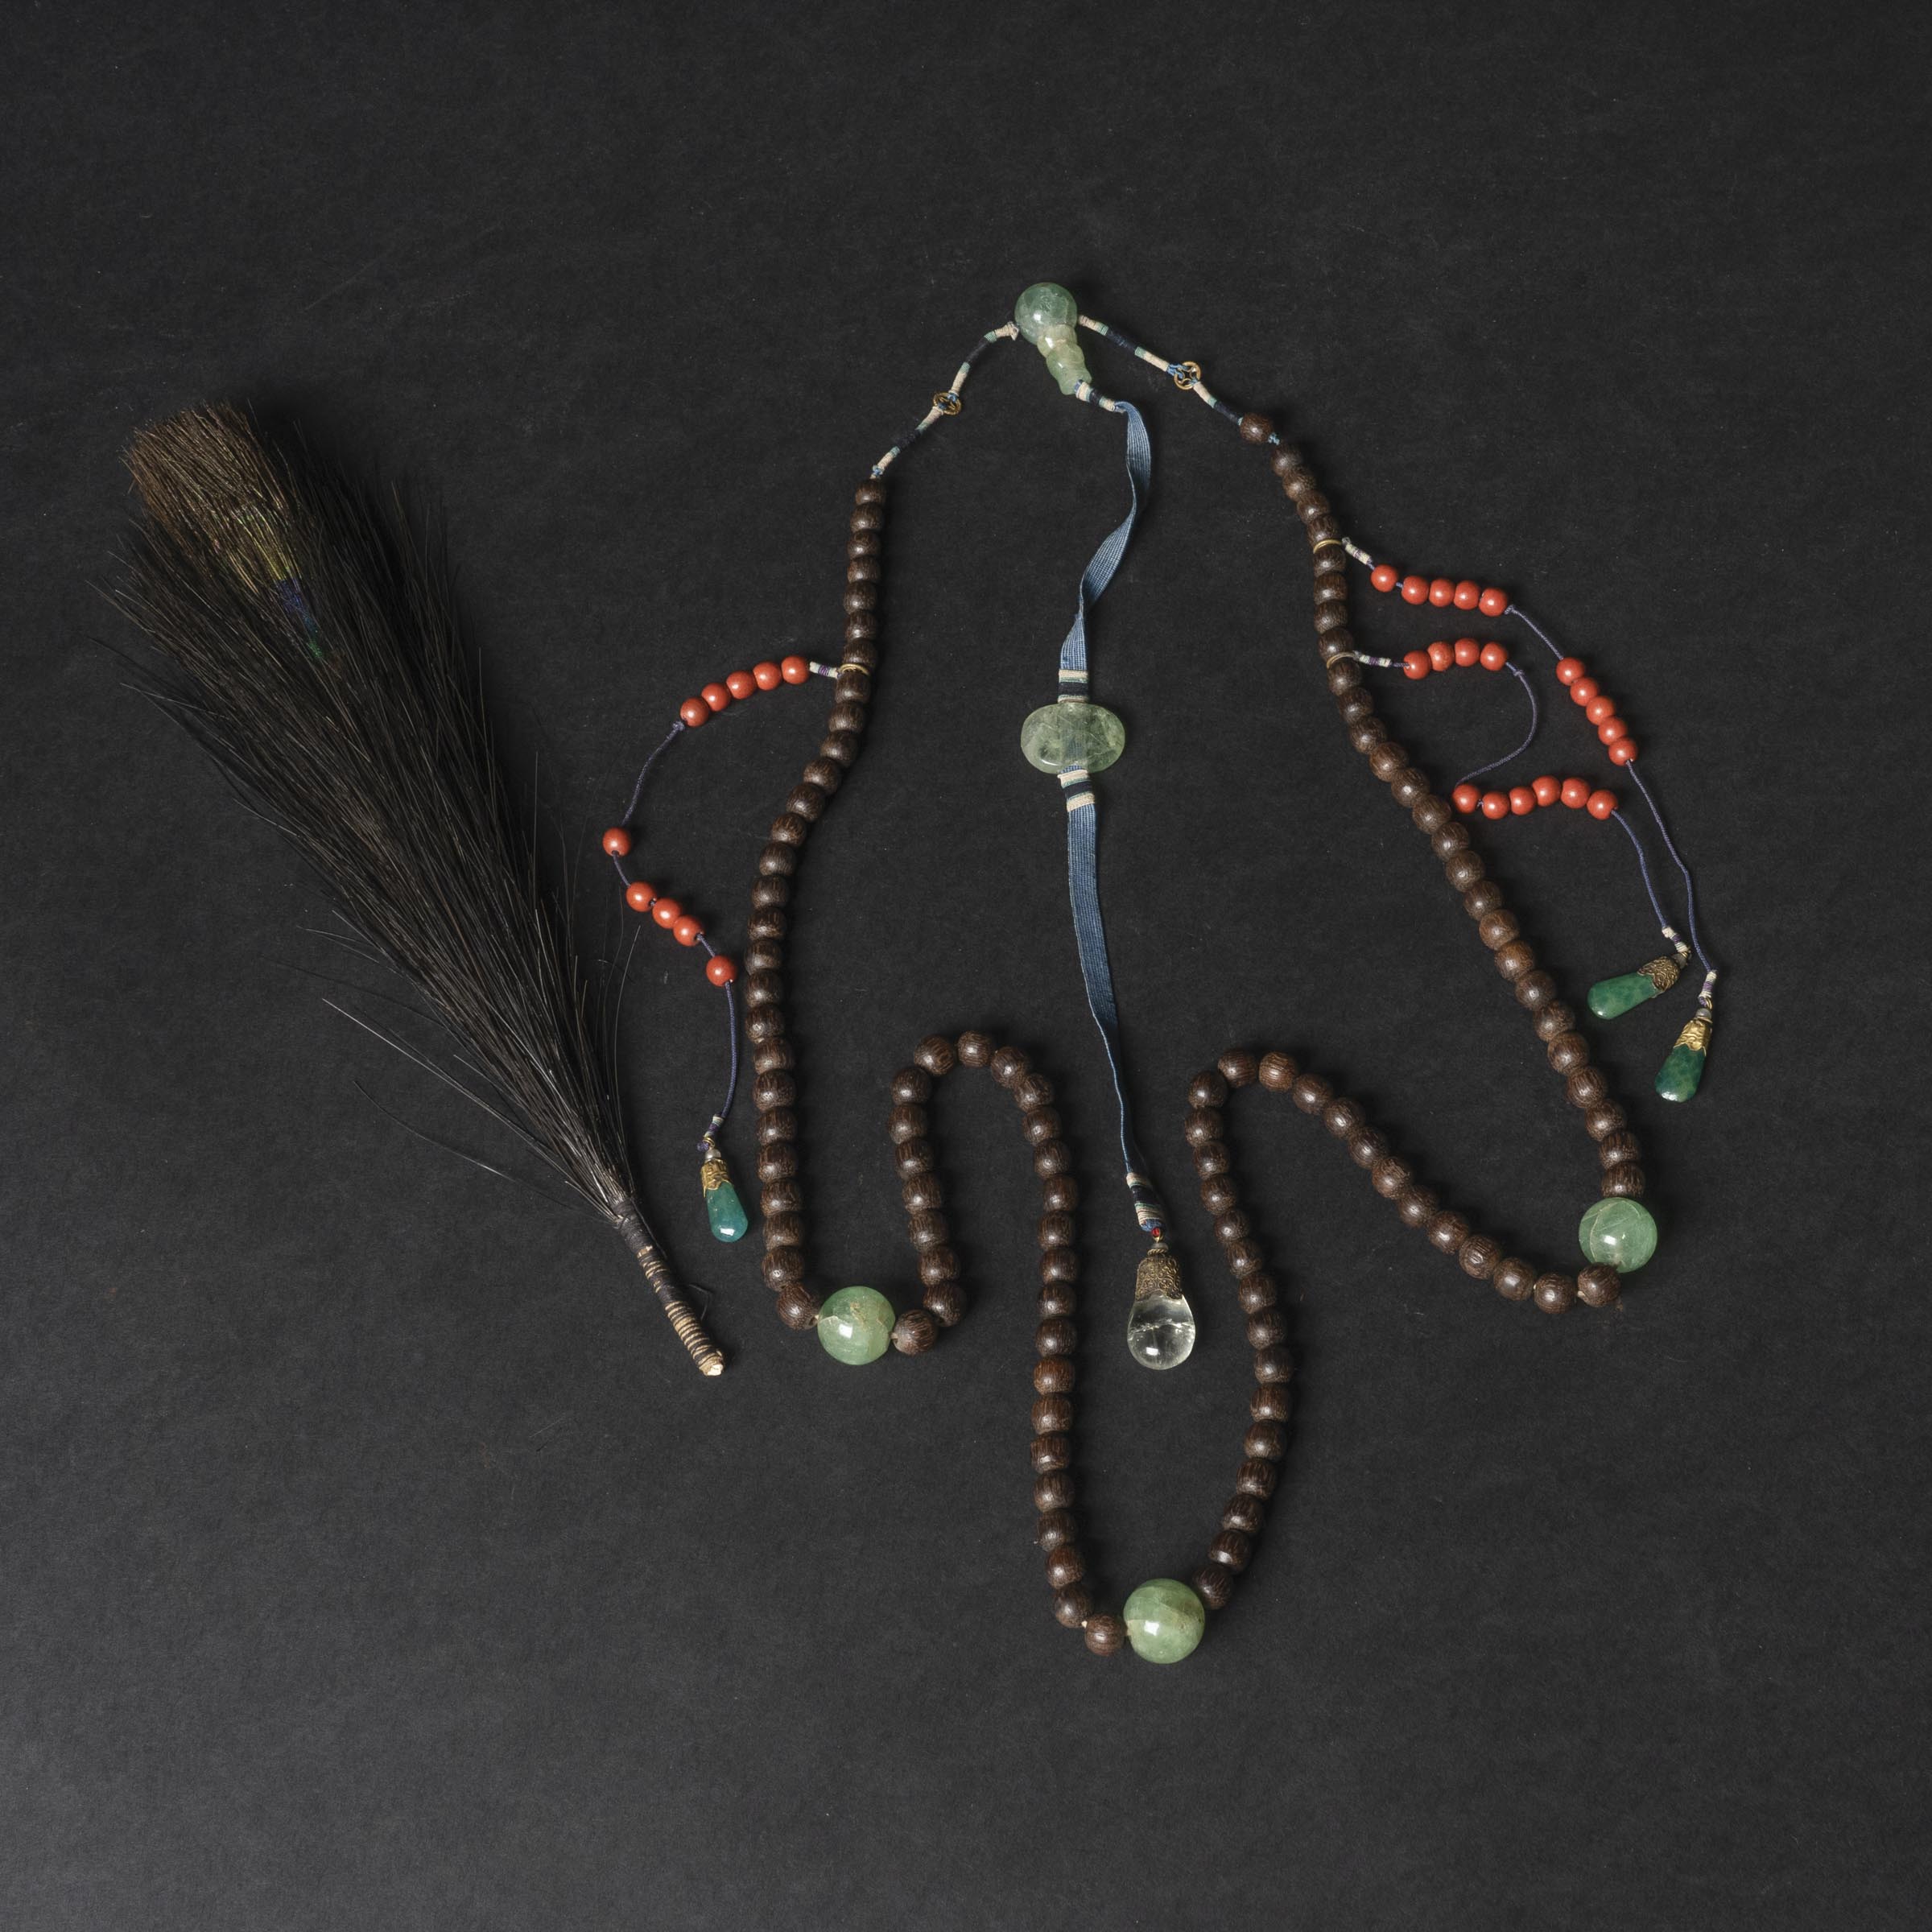 A Mandarin's Court Necklace (Chaozhu), Together With a 'One-Eyed' Peacock Feather Mandarin Court Hat Plume, 19th/20th Century